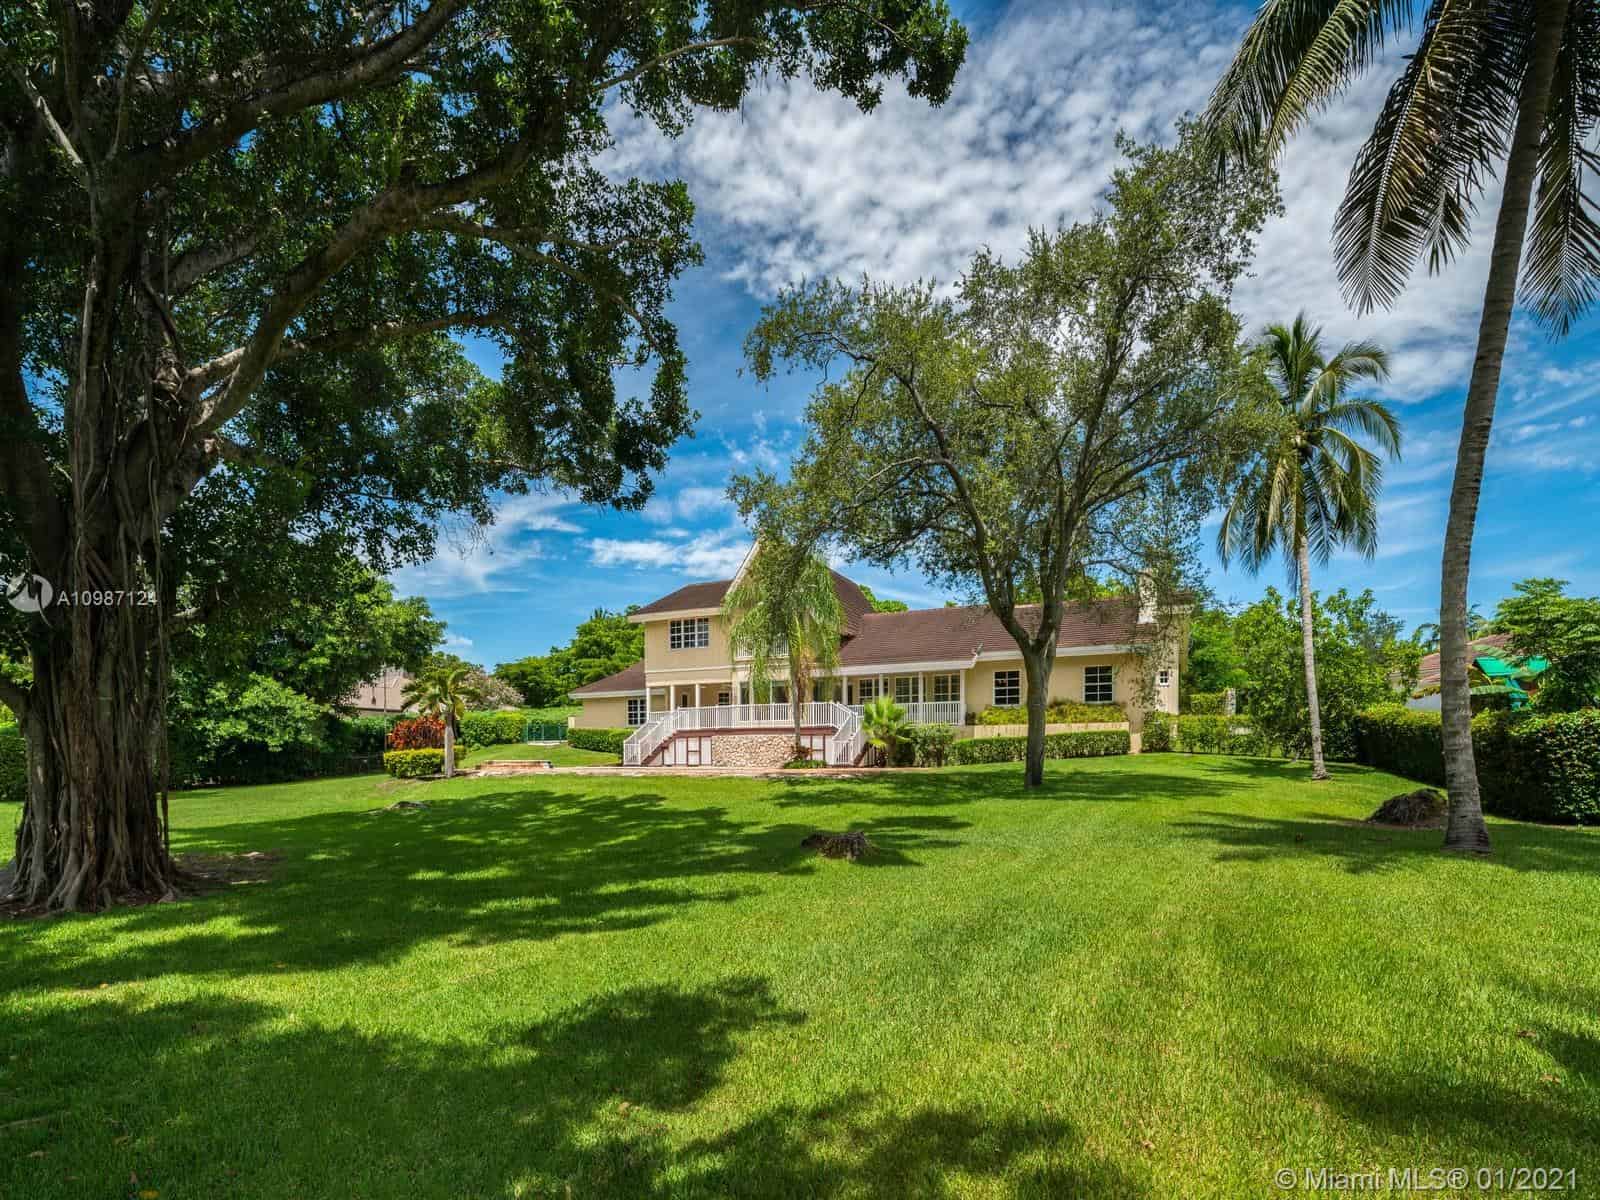 441 Ridge Rd, Coral Gables: Ultra-Luxury Homes for Sale in Coral Gables